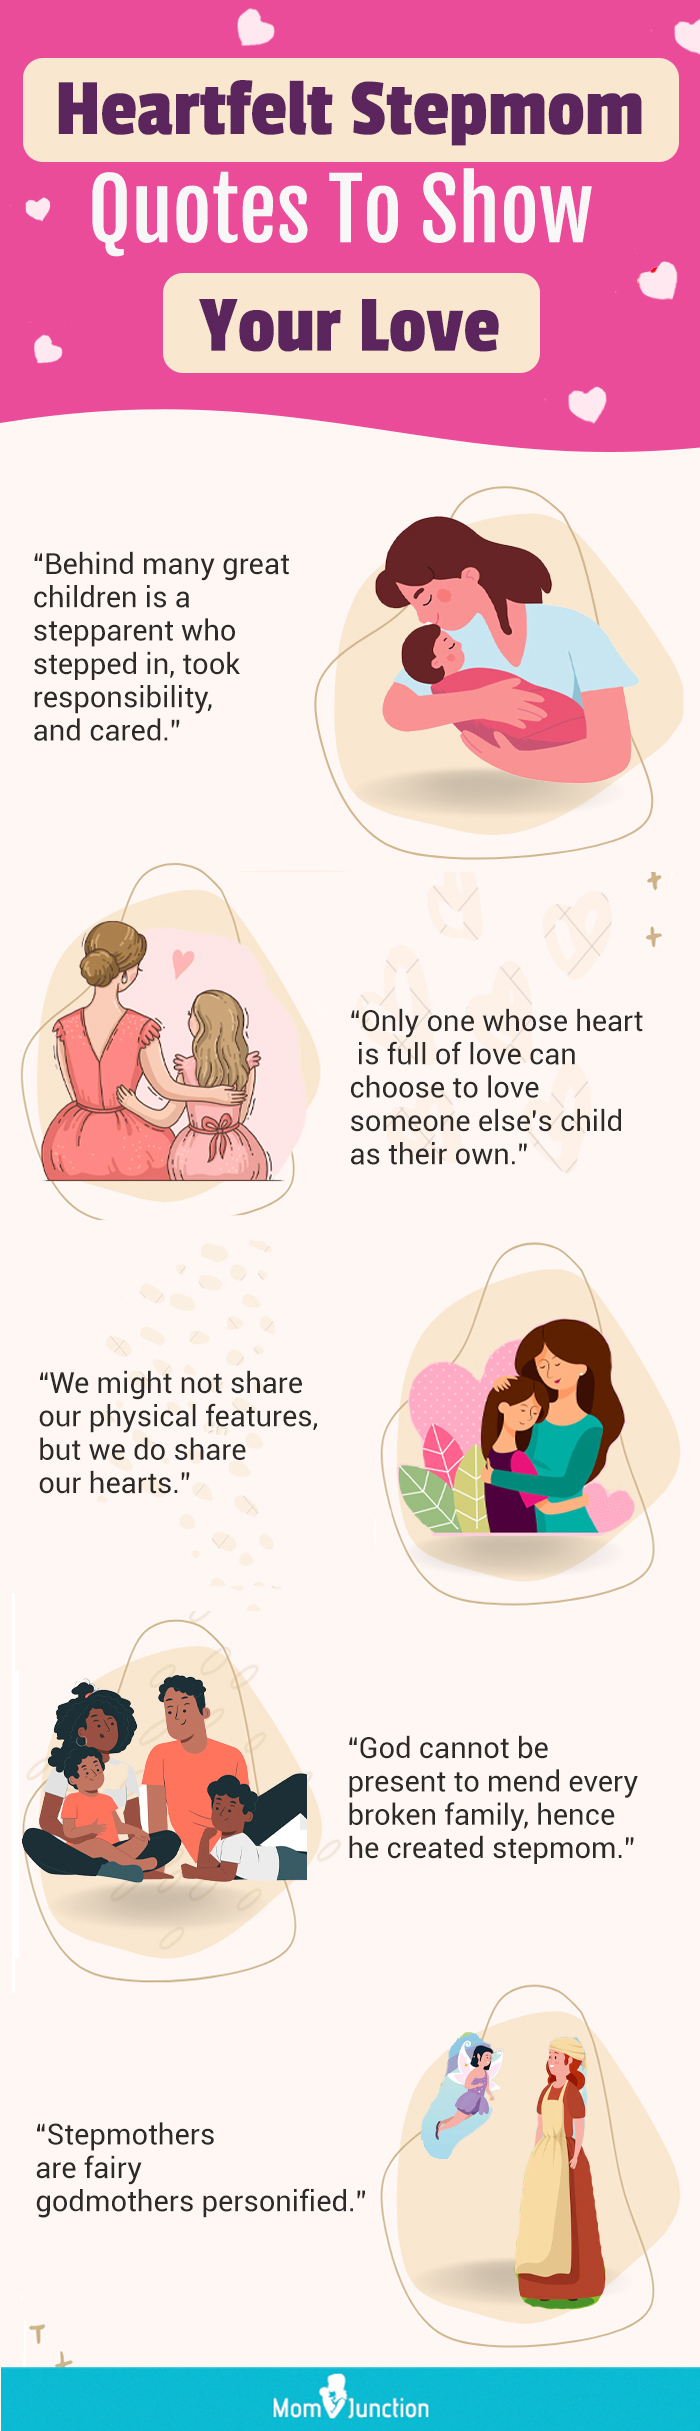 heartfelt stepmom quotes to show your love (infographic)